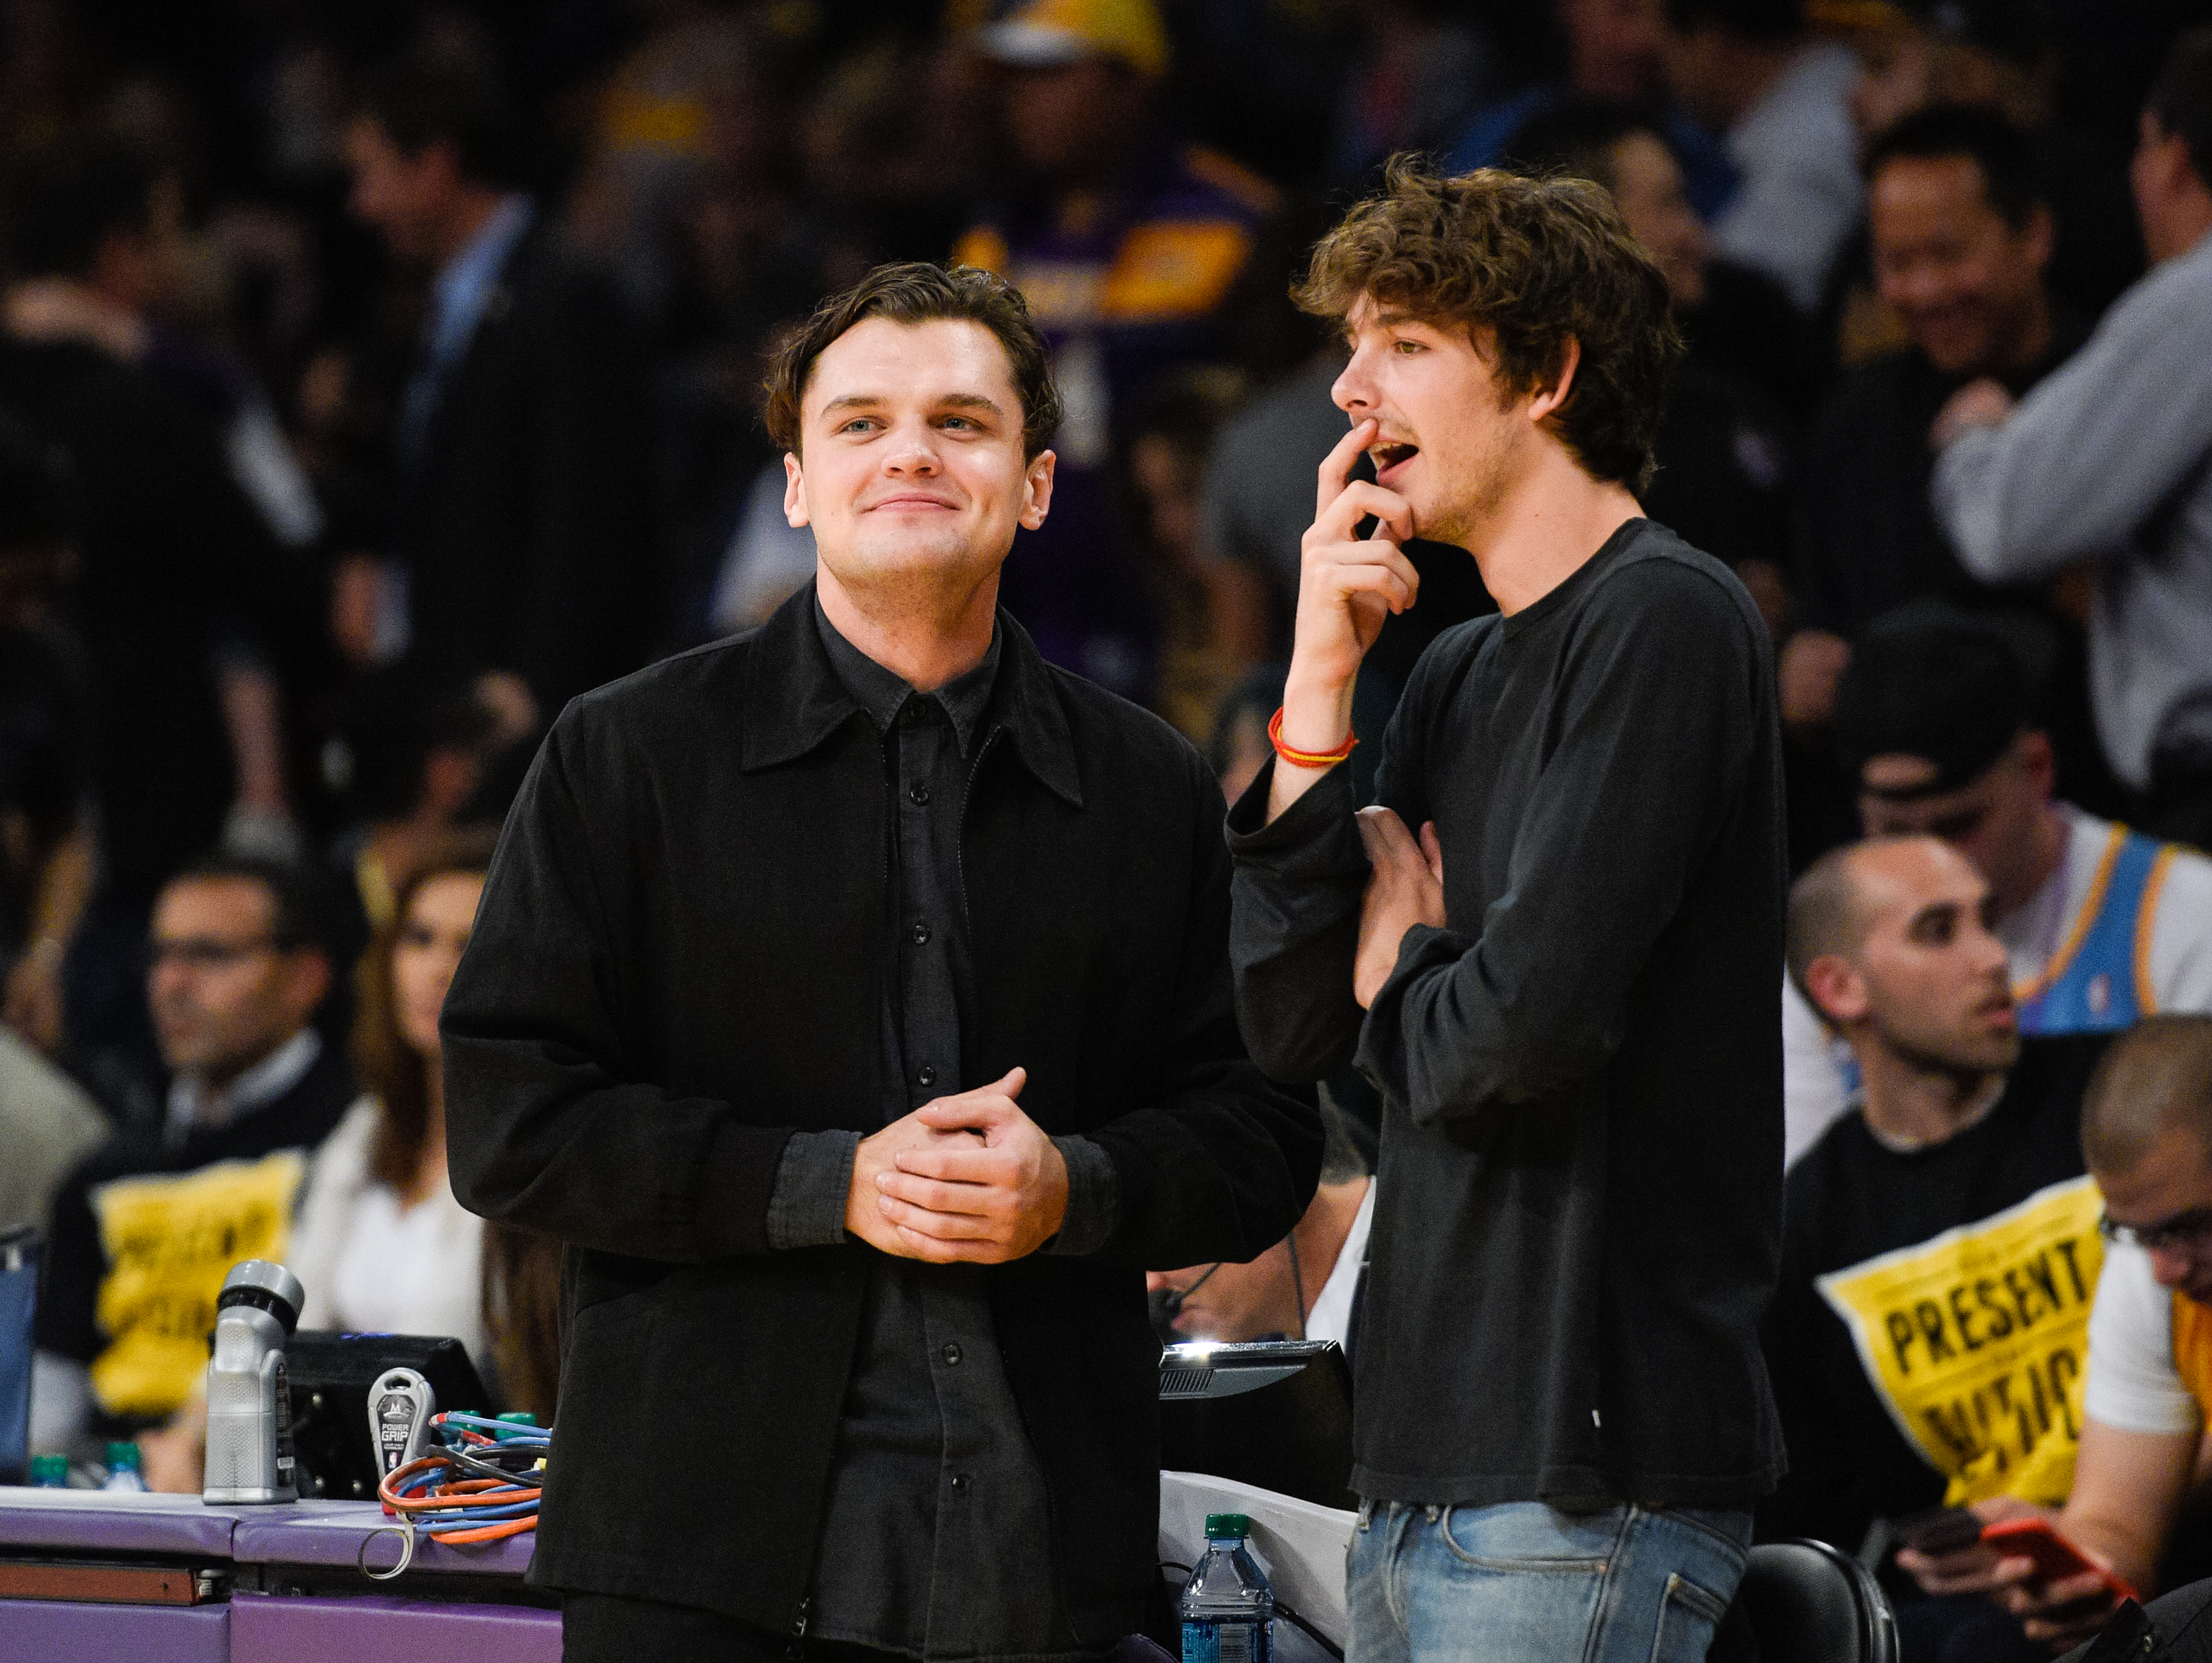 Ray Nicholson (L) attends a basketball game between the Minnesota Timberwolves and the Los Angeles Lakers at Staples Center on October 28, 2015 in Los Angeles, California.